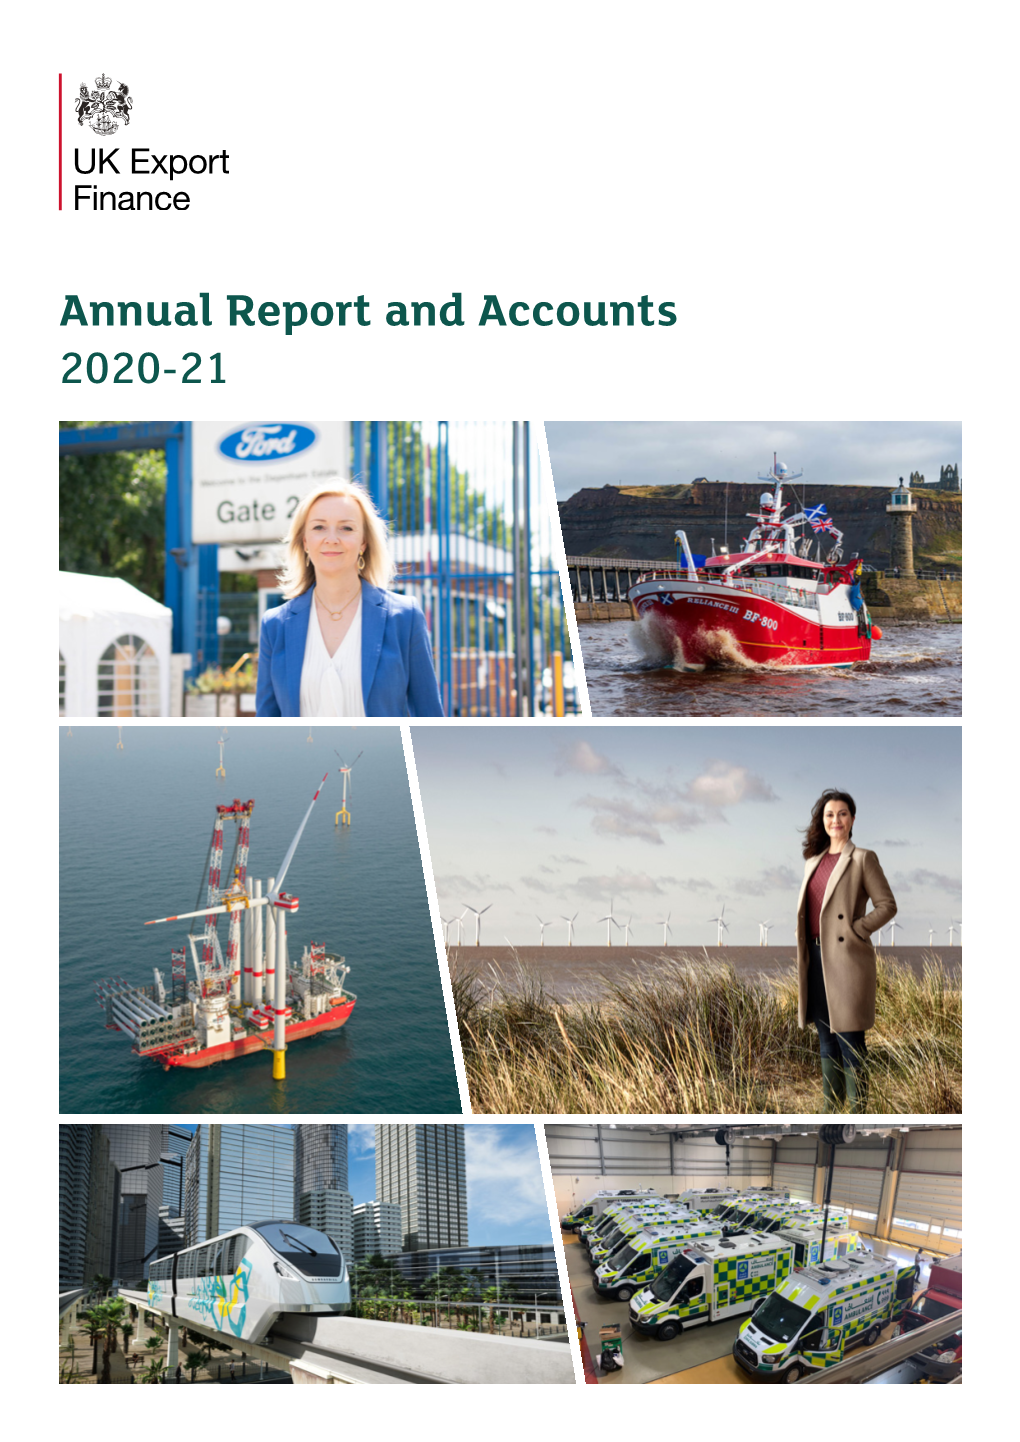 UK Export Finance – Annual Report and Accounts 2020-21